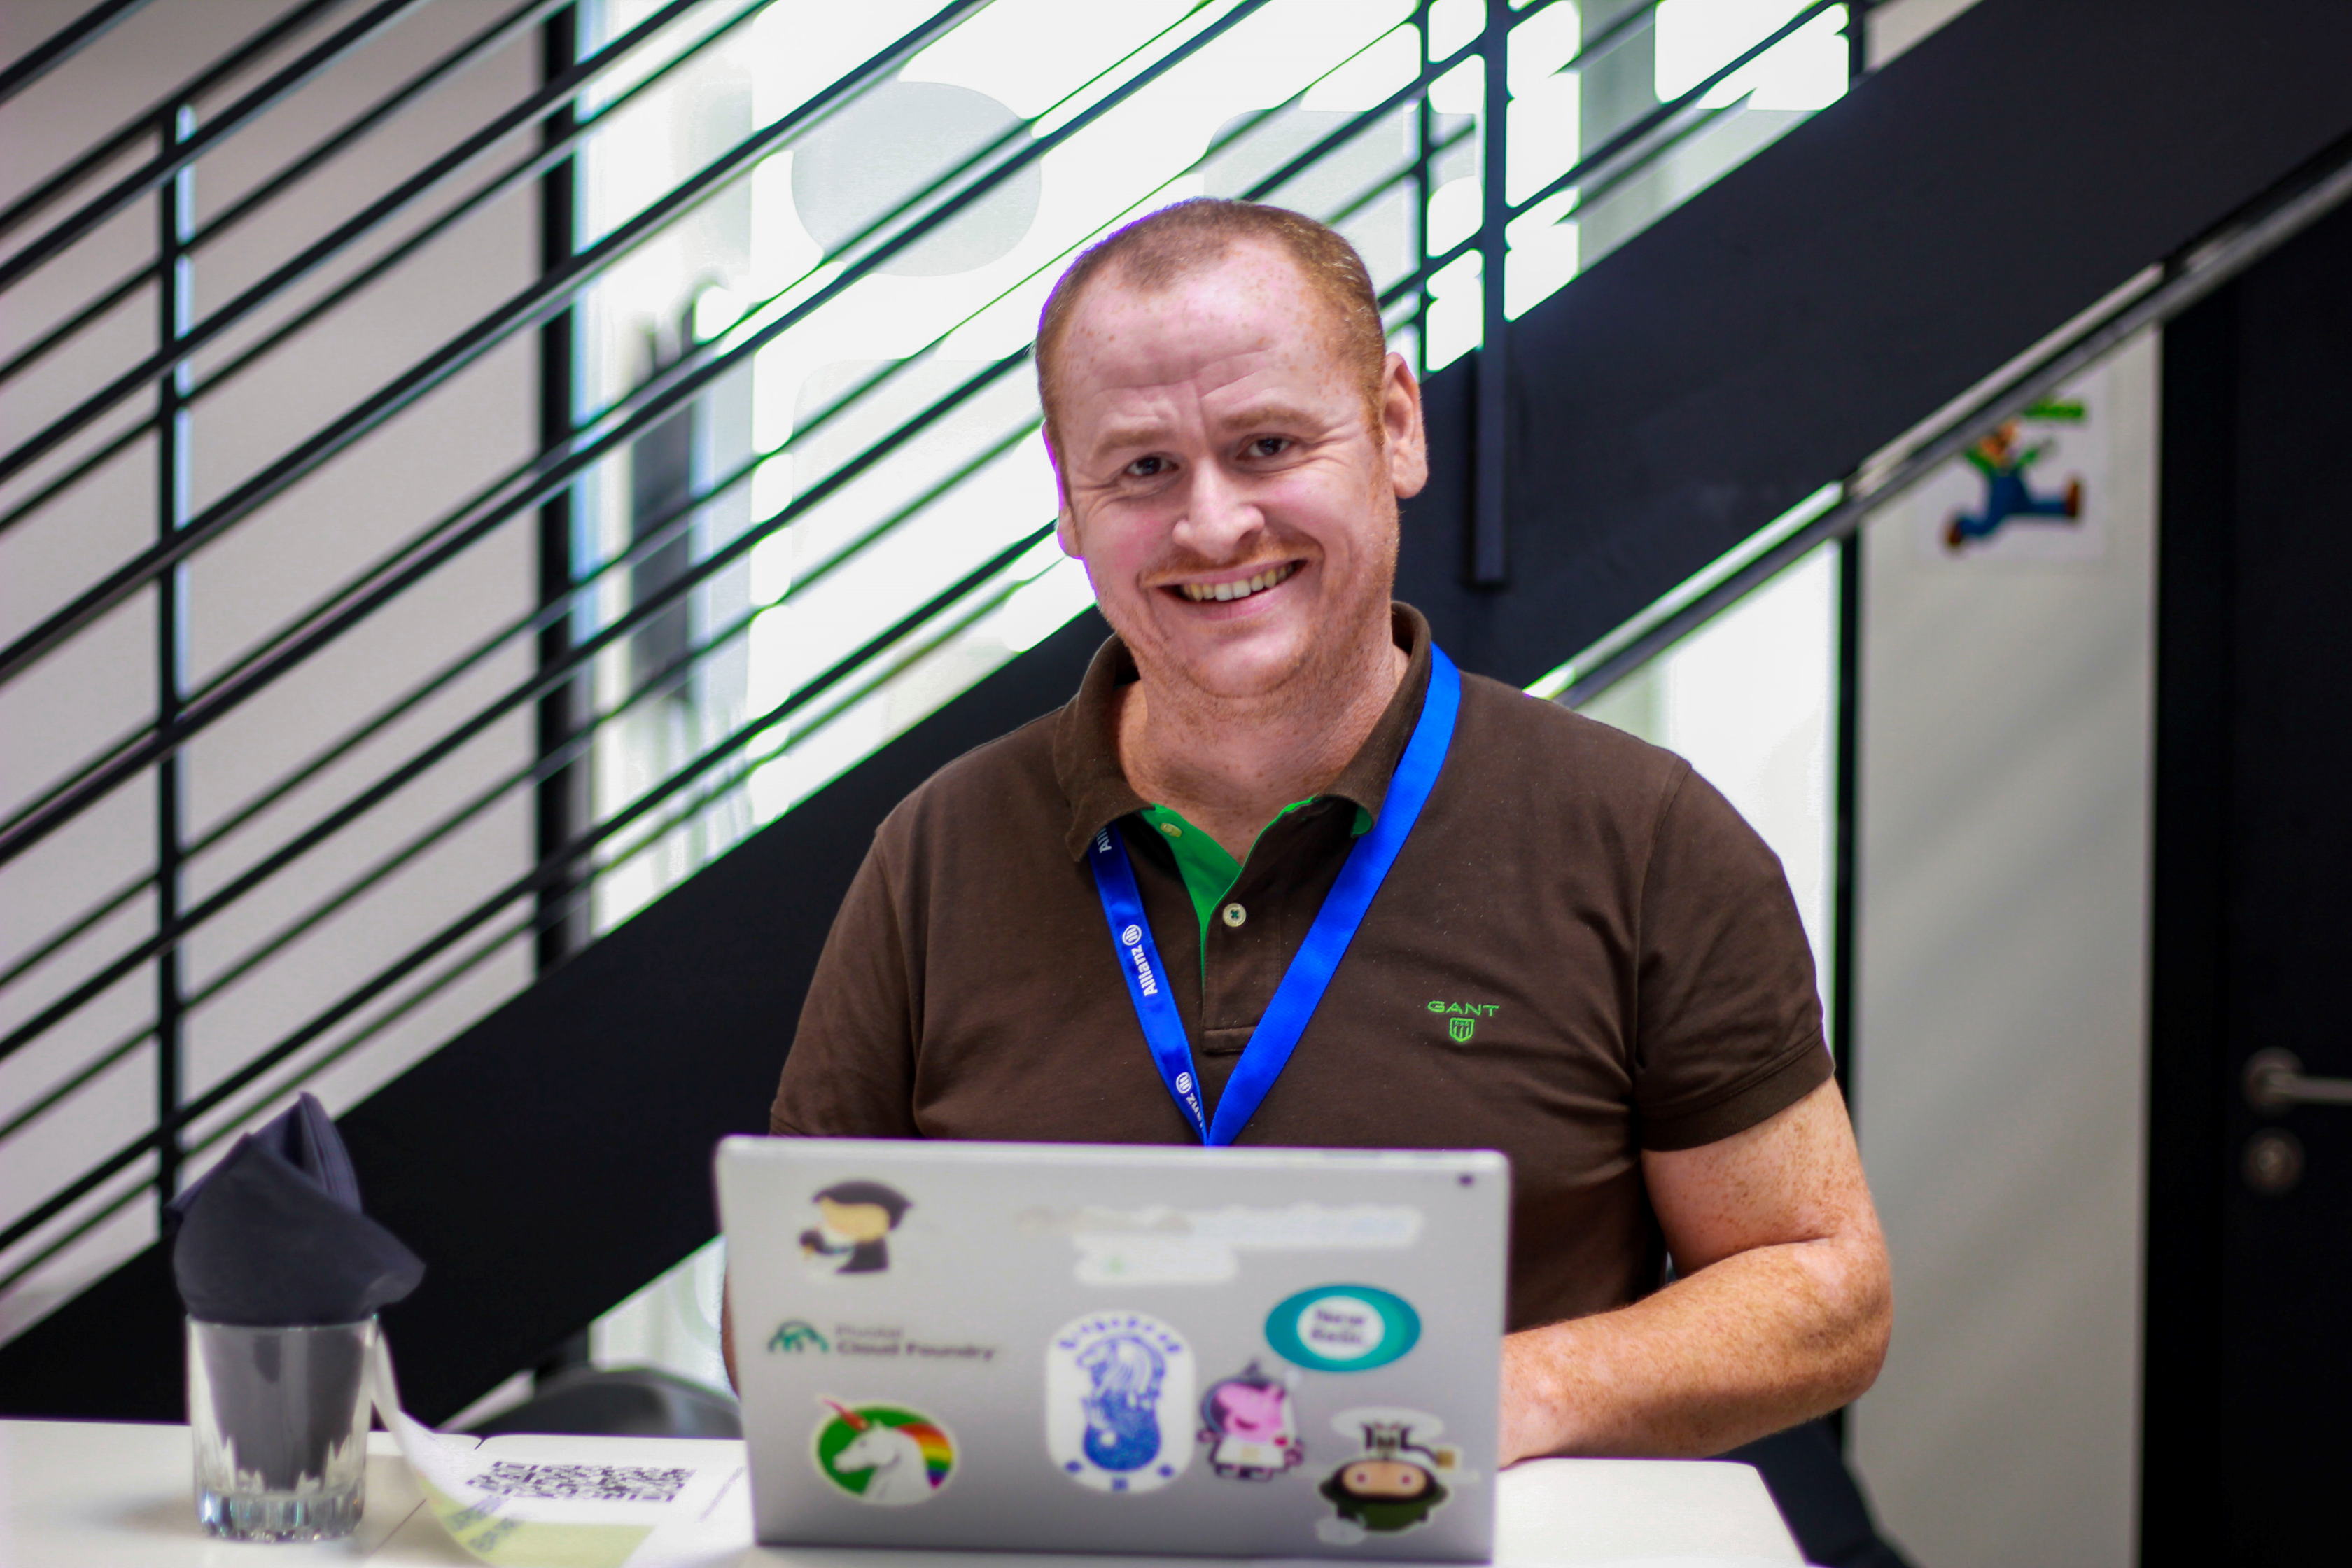 Des Field Corbett (pictured above) and Clint Pidlubny are the two organizers and creators of the eMerge conference, which took place at the Allianz Global Digital Factory.